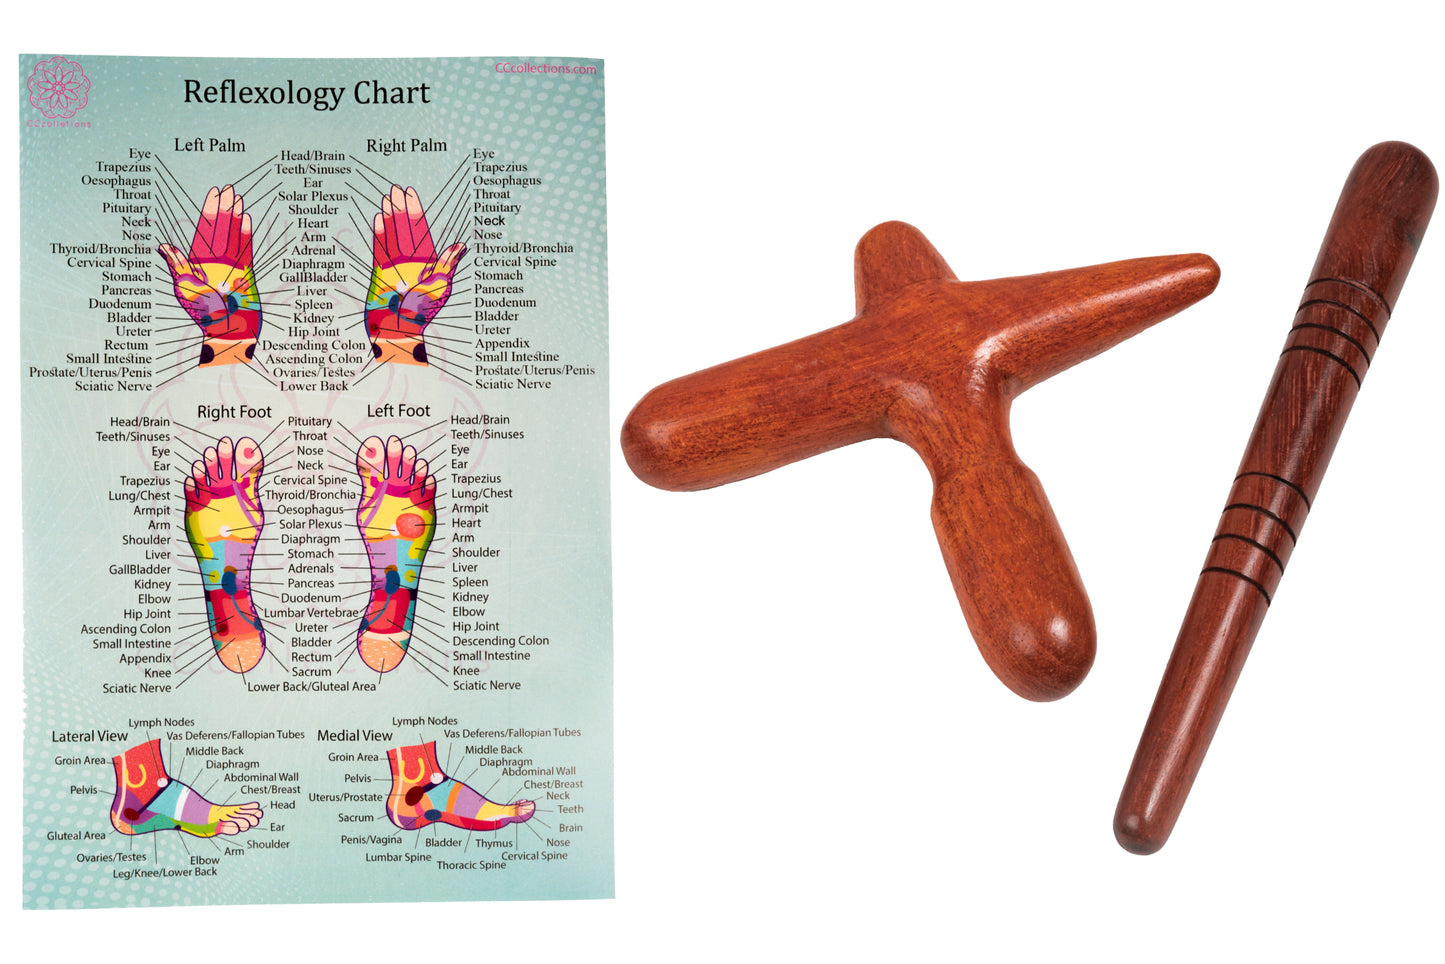 Versatile Wooden Manual Massage Tool Sets for professionals with ENGLISH Reflexology Charts - CCcollections - CCCollections